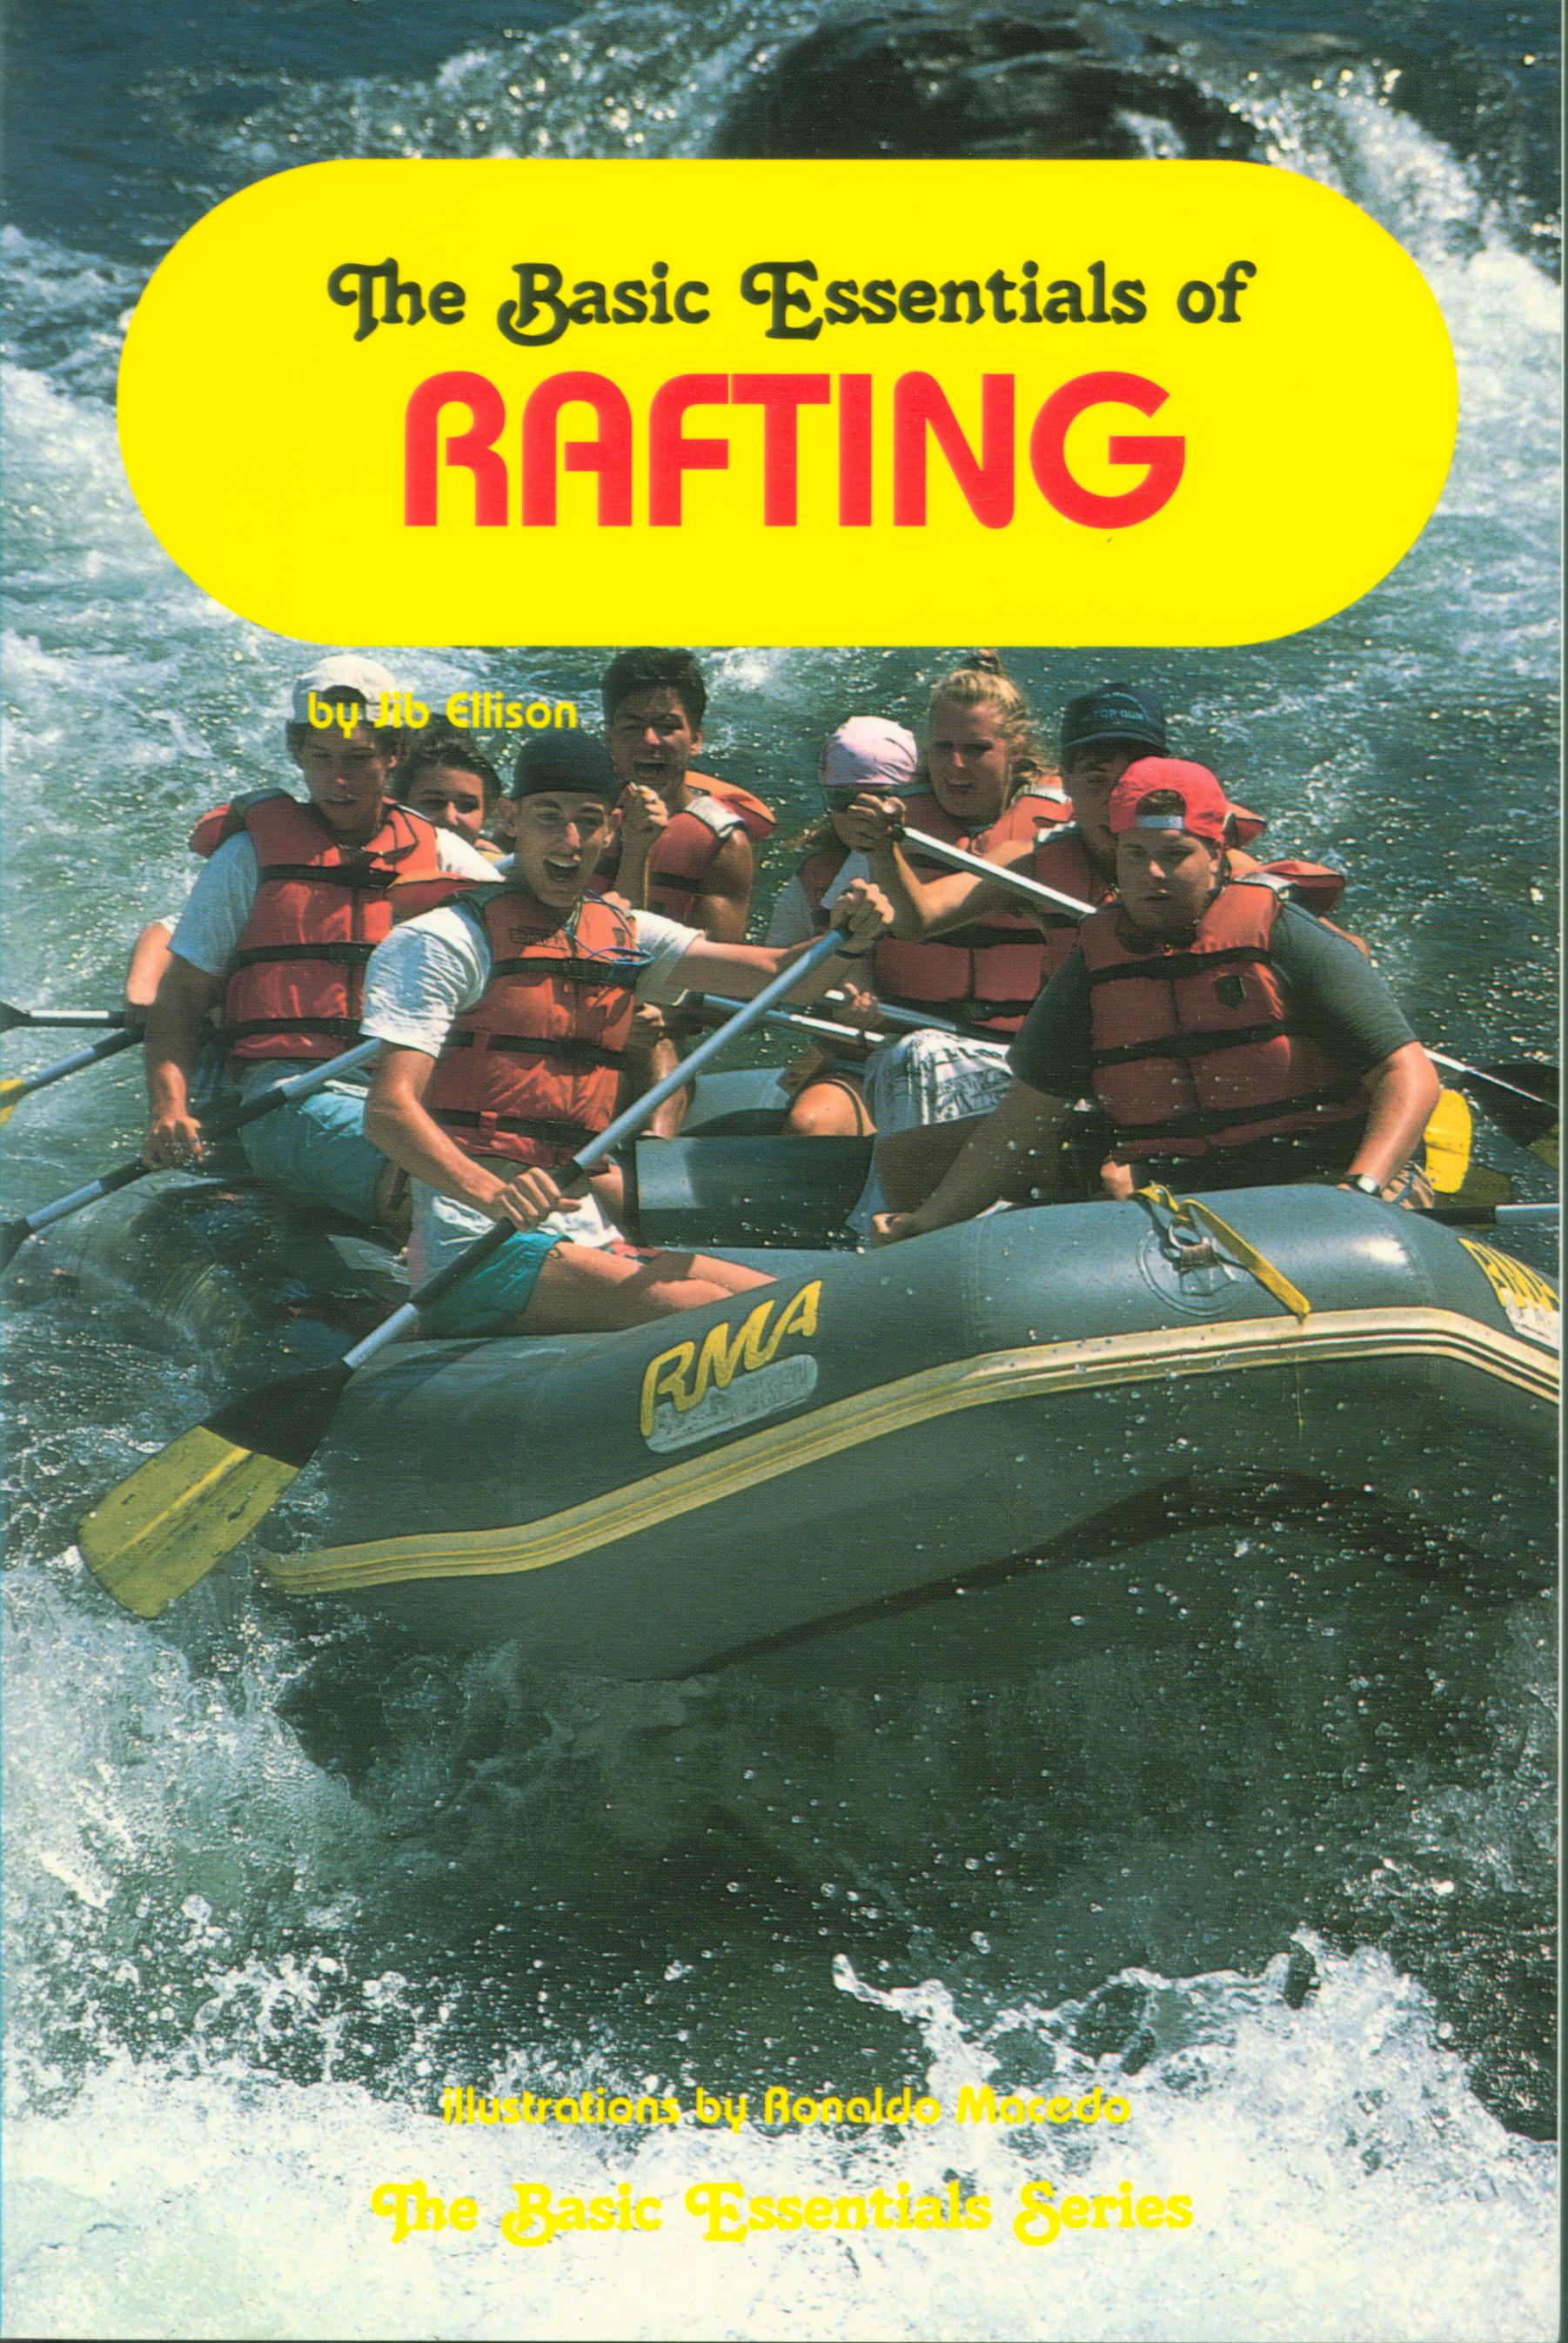 THE BASIC ESSENTIALS OF RAFTING.